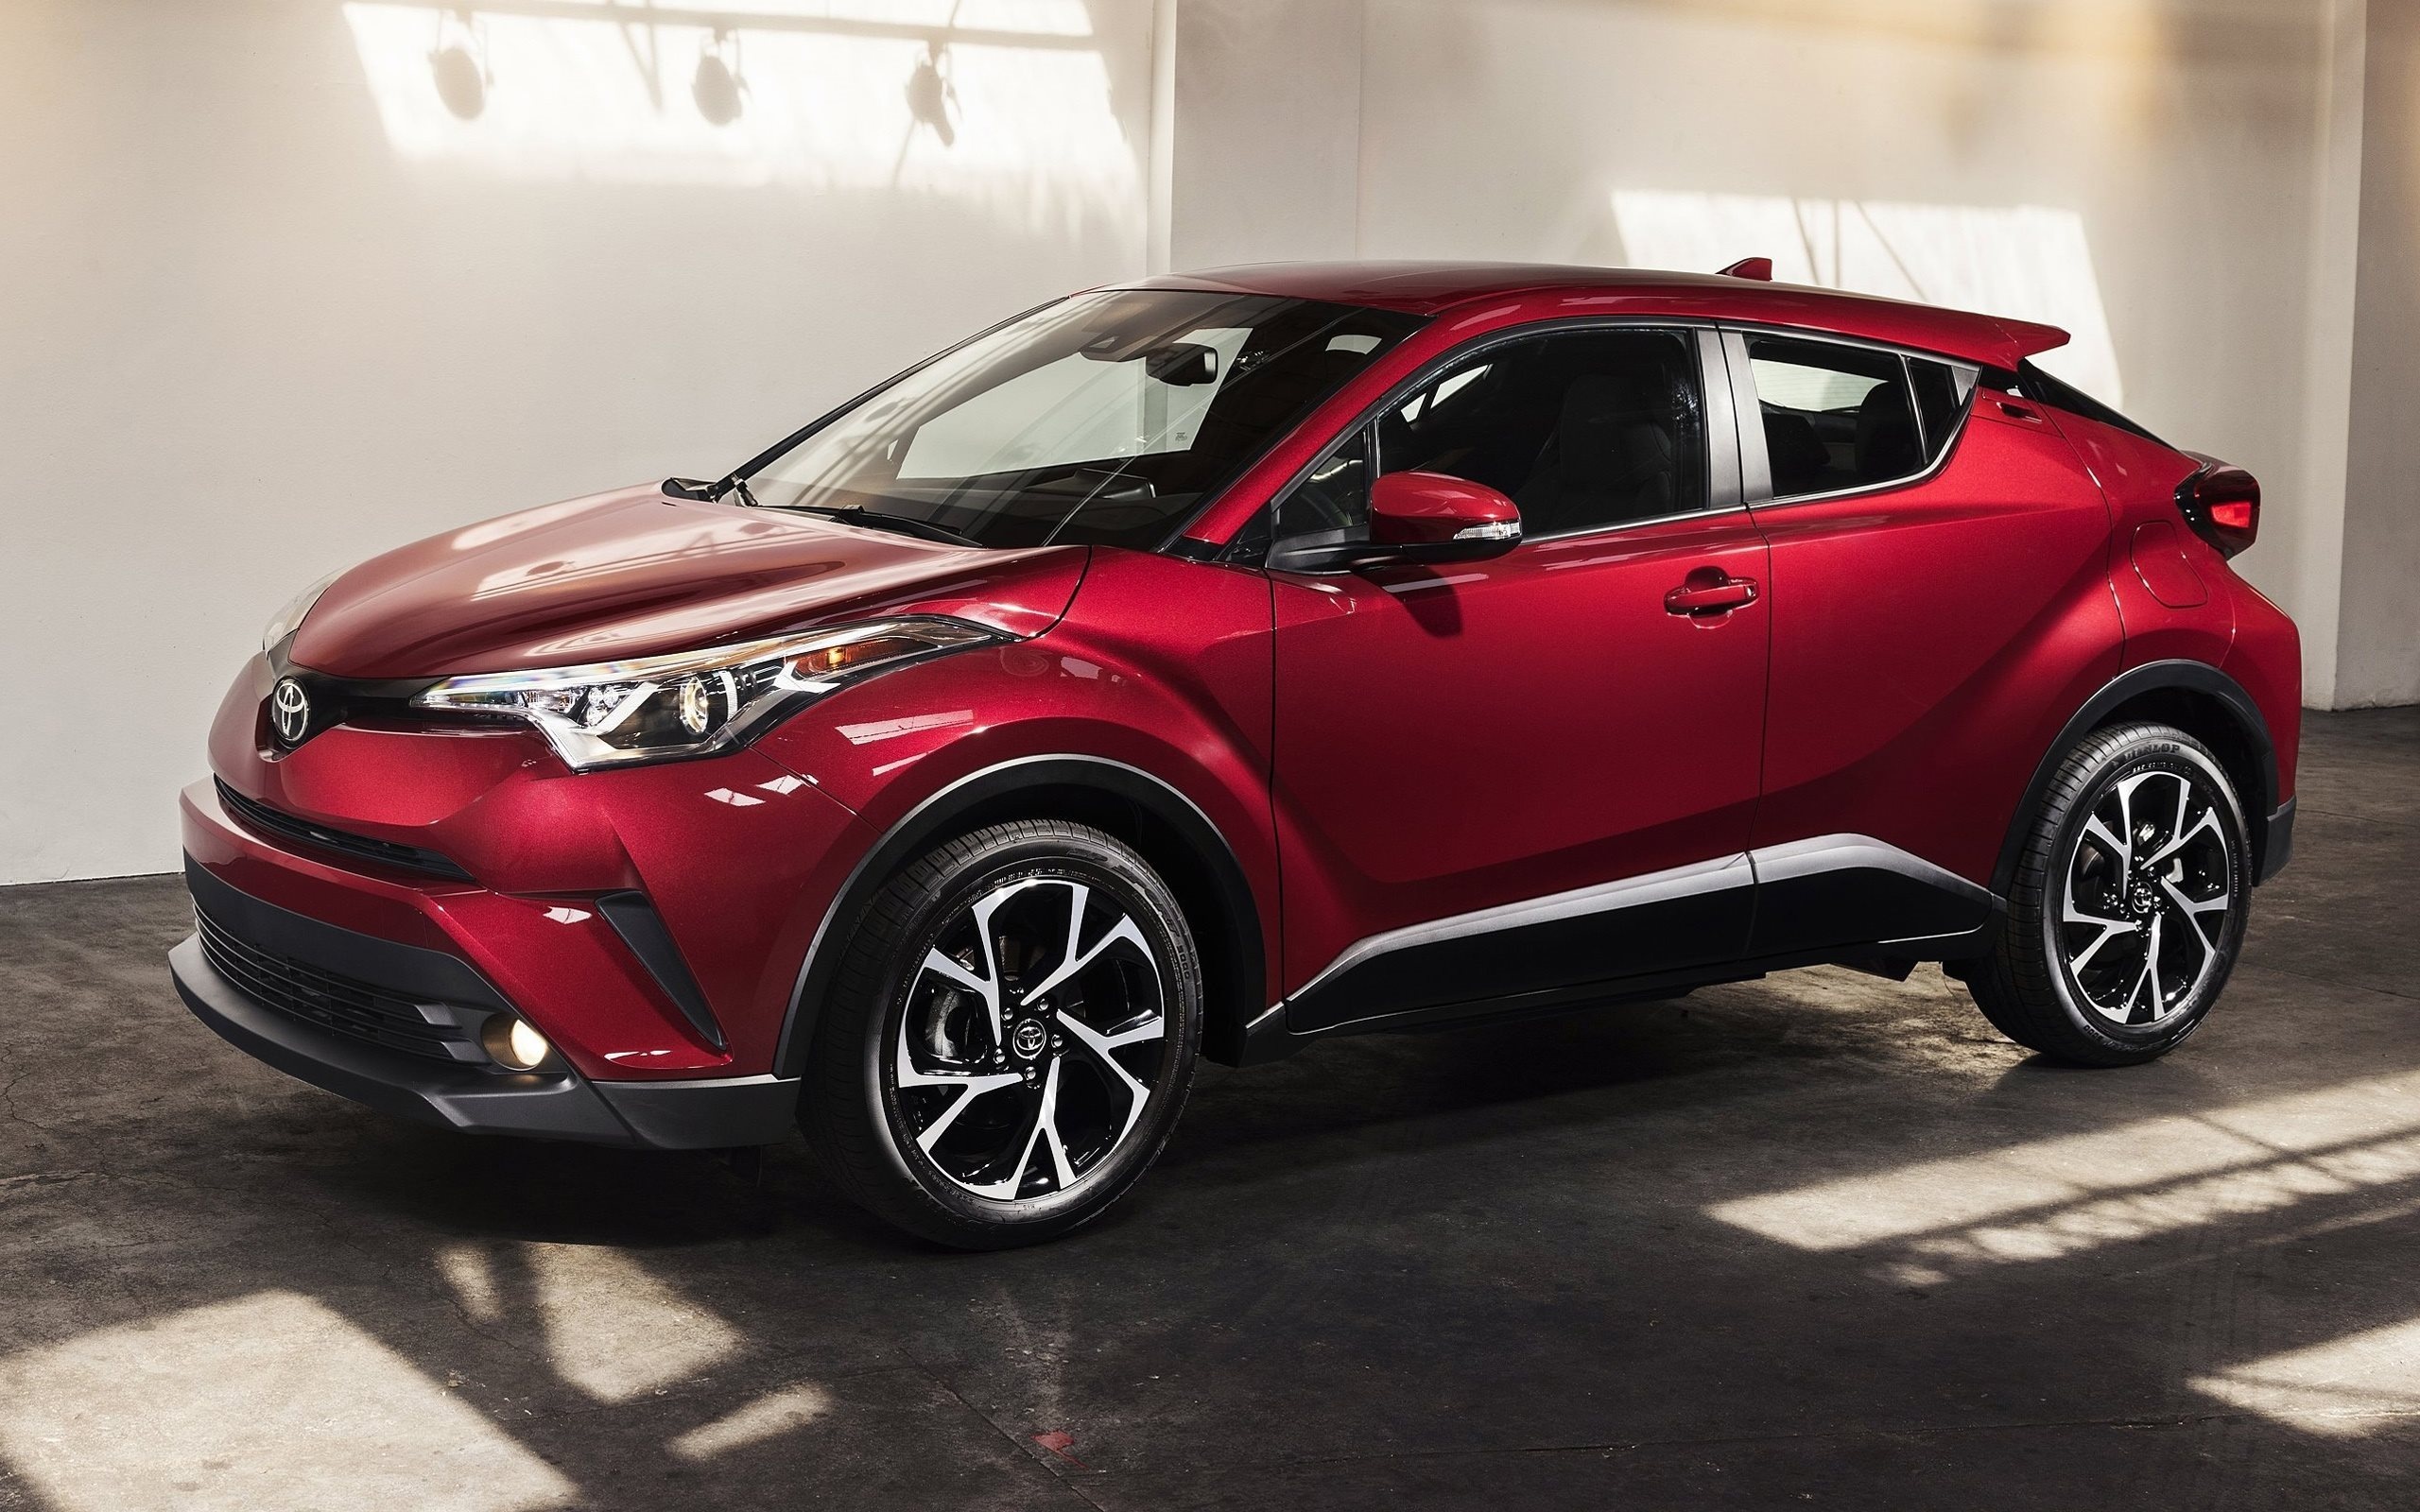 Toyota C-HR, Red crossover, High quality pictures, Desktop, 2560x1600 HD Desktop